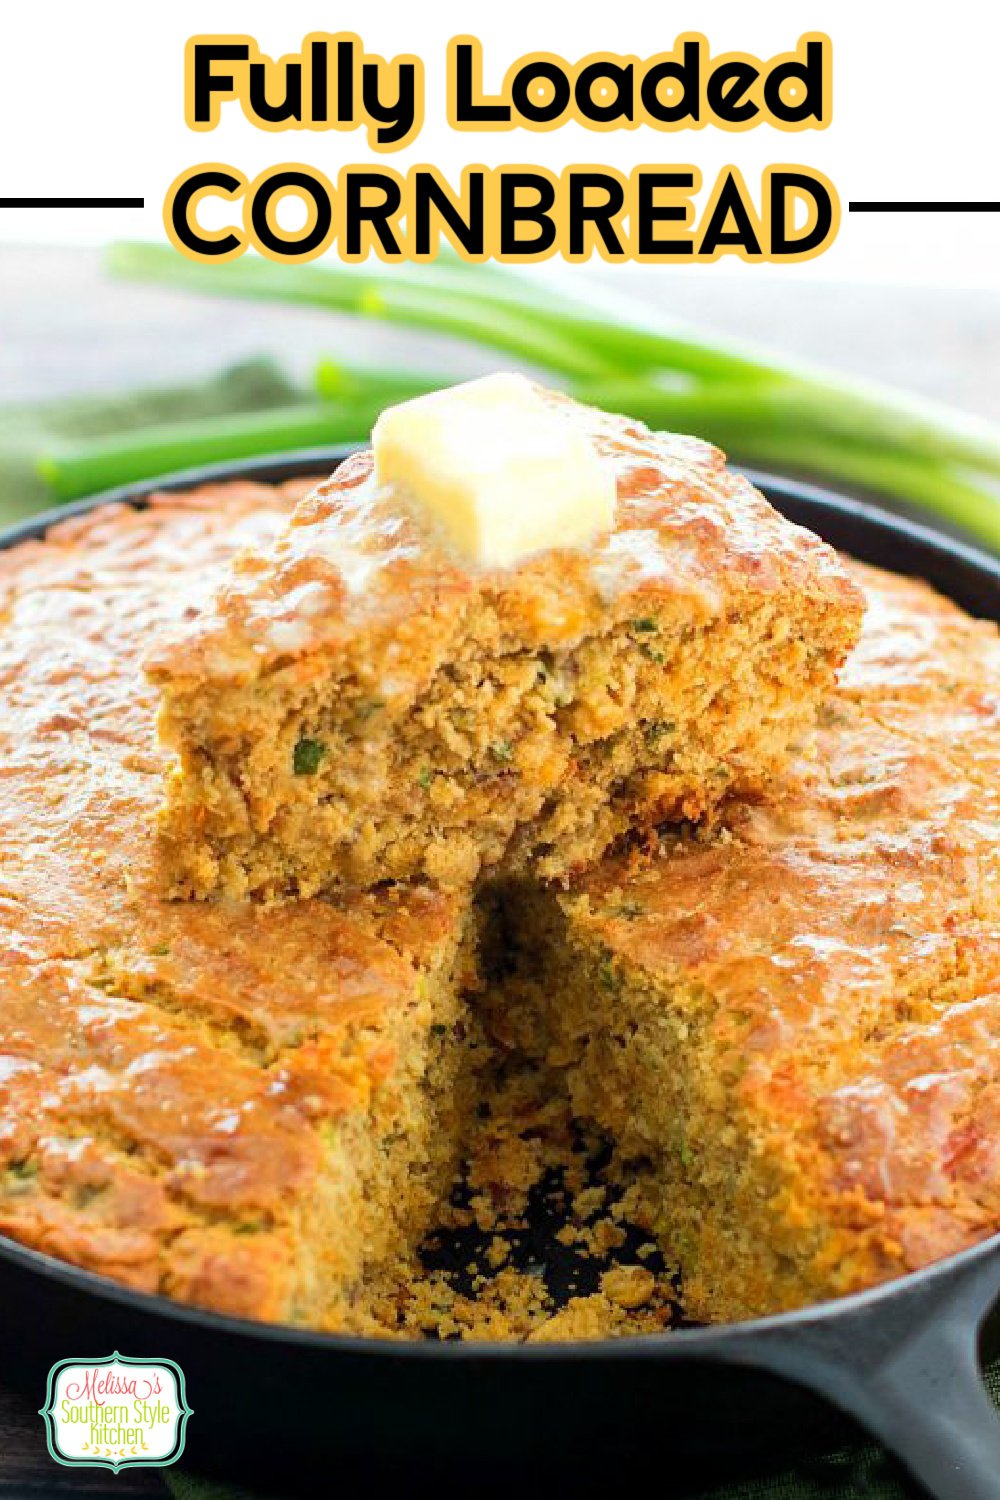 This Fully Loaded Cornbread makes the perfect sidekick for soup, stew, chili and beans #cornbread #southerncornbread #cornbreadrecipes #loadedcornbread #southernfood #southernrecipes #bacon #sidedishrecipes #castironcooking #castironcornbread via @melissasssk